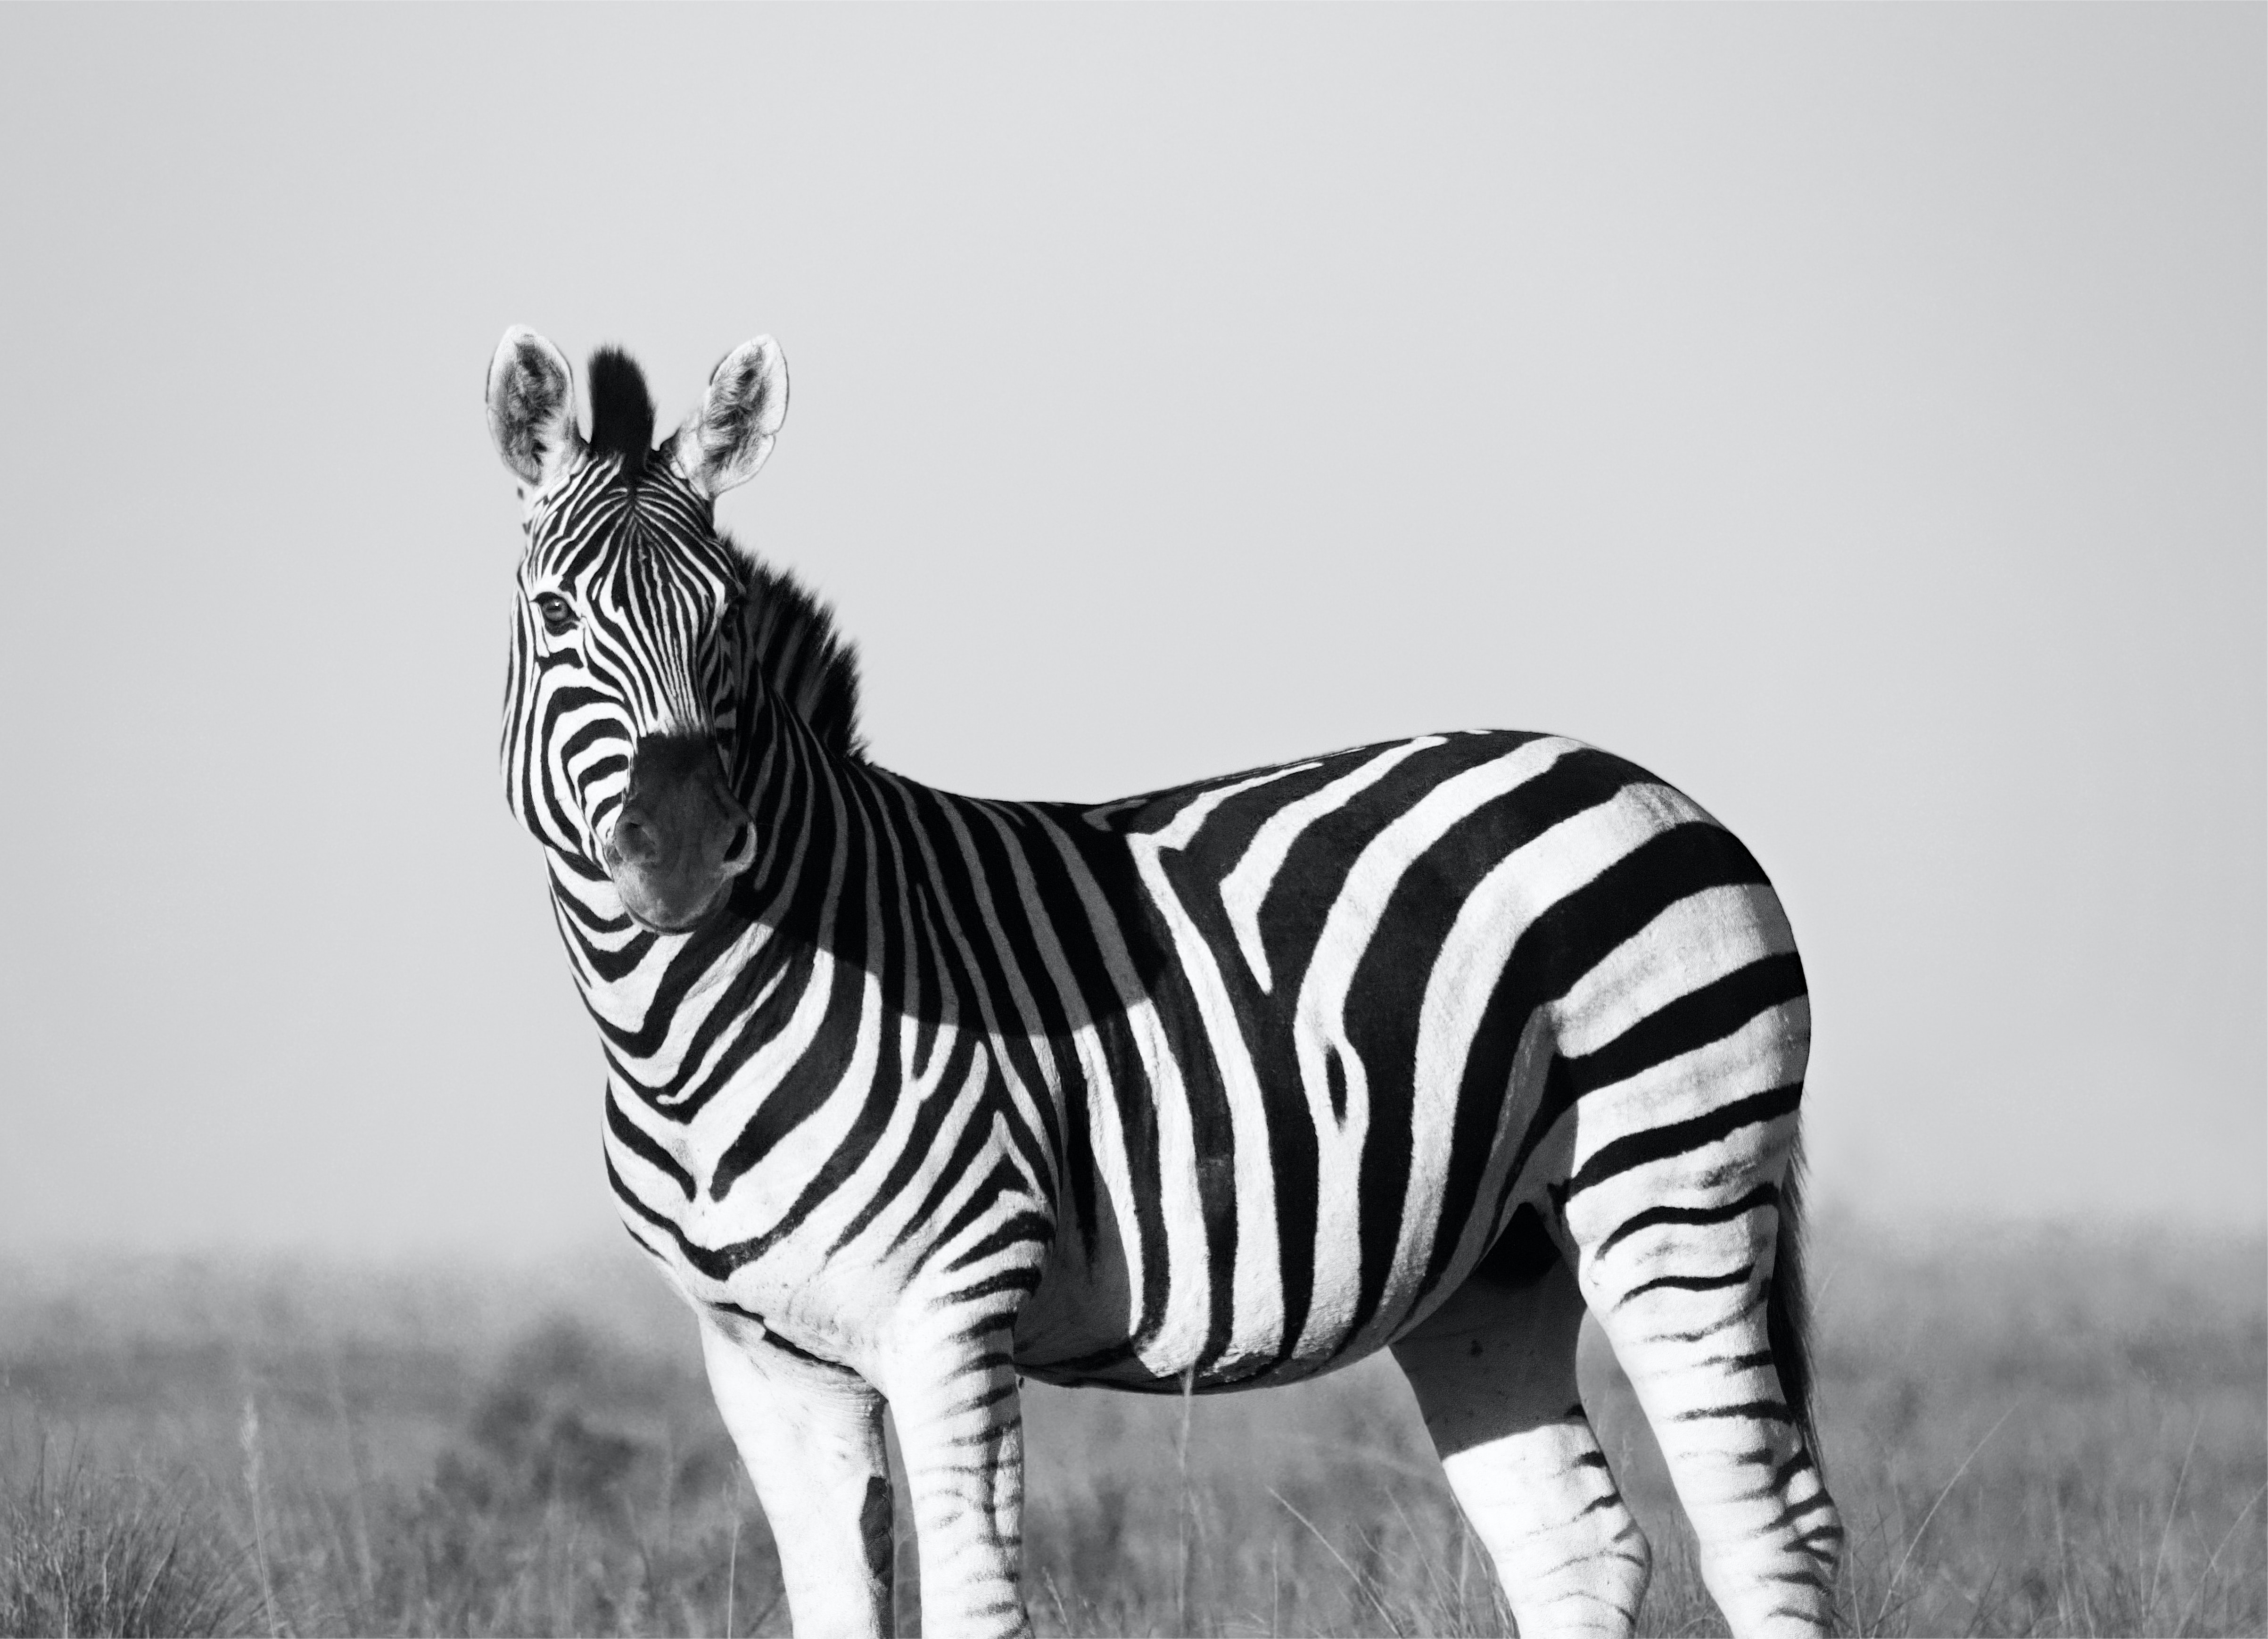 The Longing of Zebras